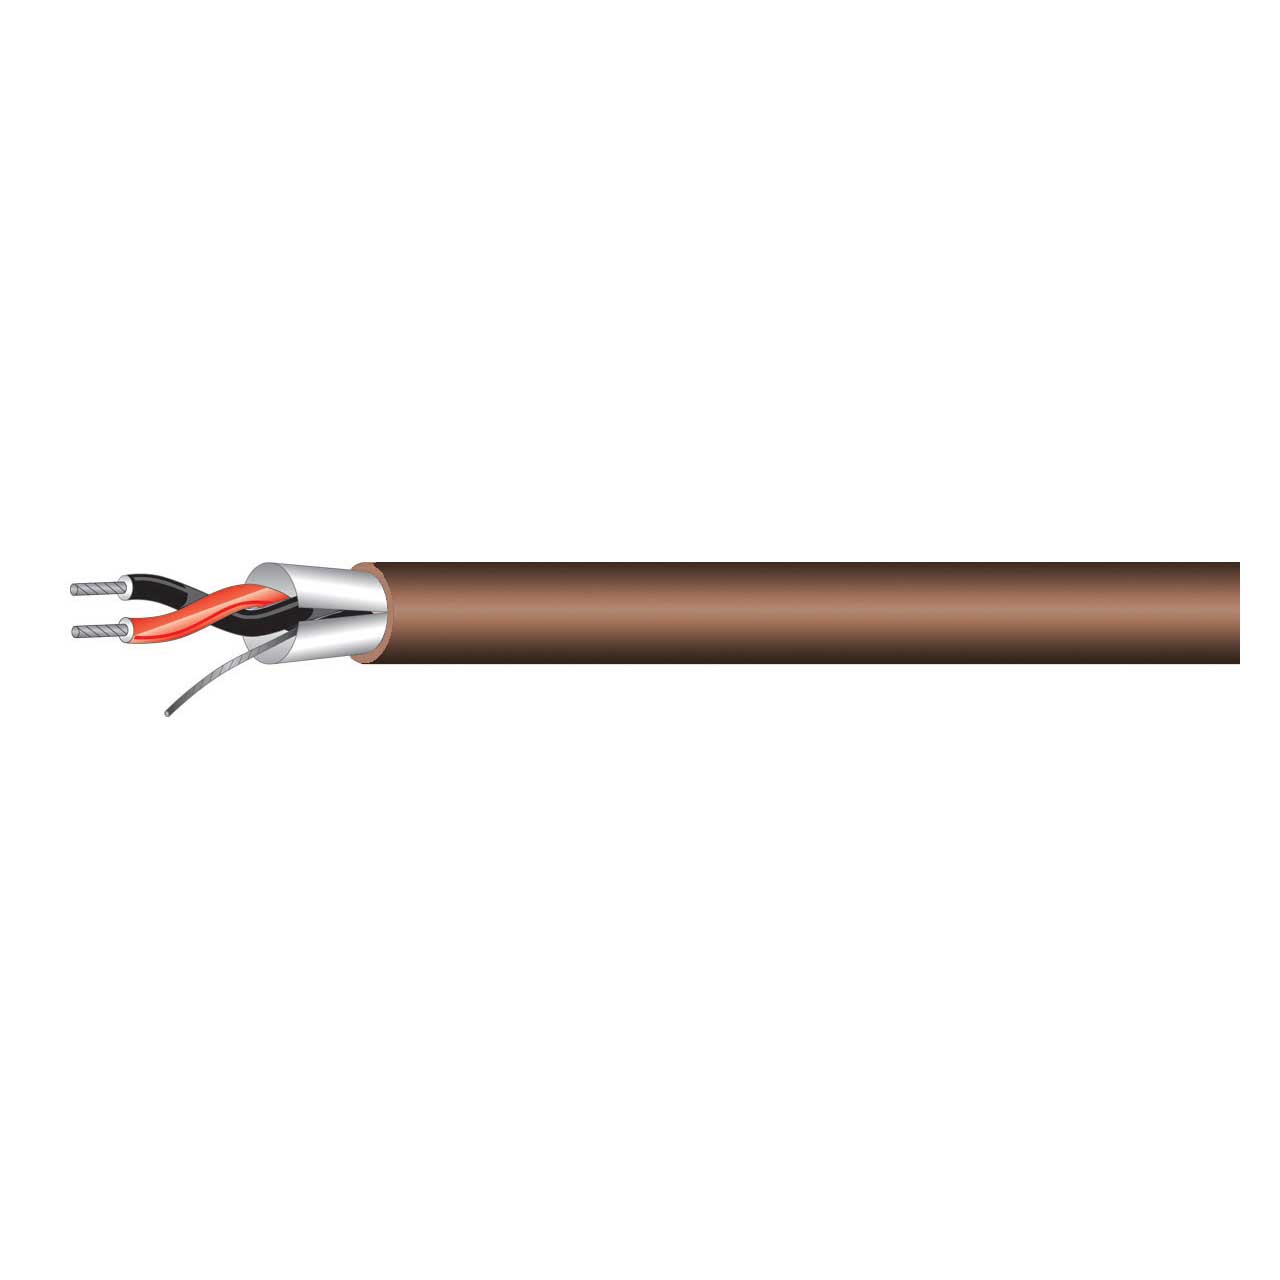 West Penn 454 1-Pair 22Awg CM Miniature Line Level Audio Cable - Brown - 500 Feet  454-500BR